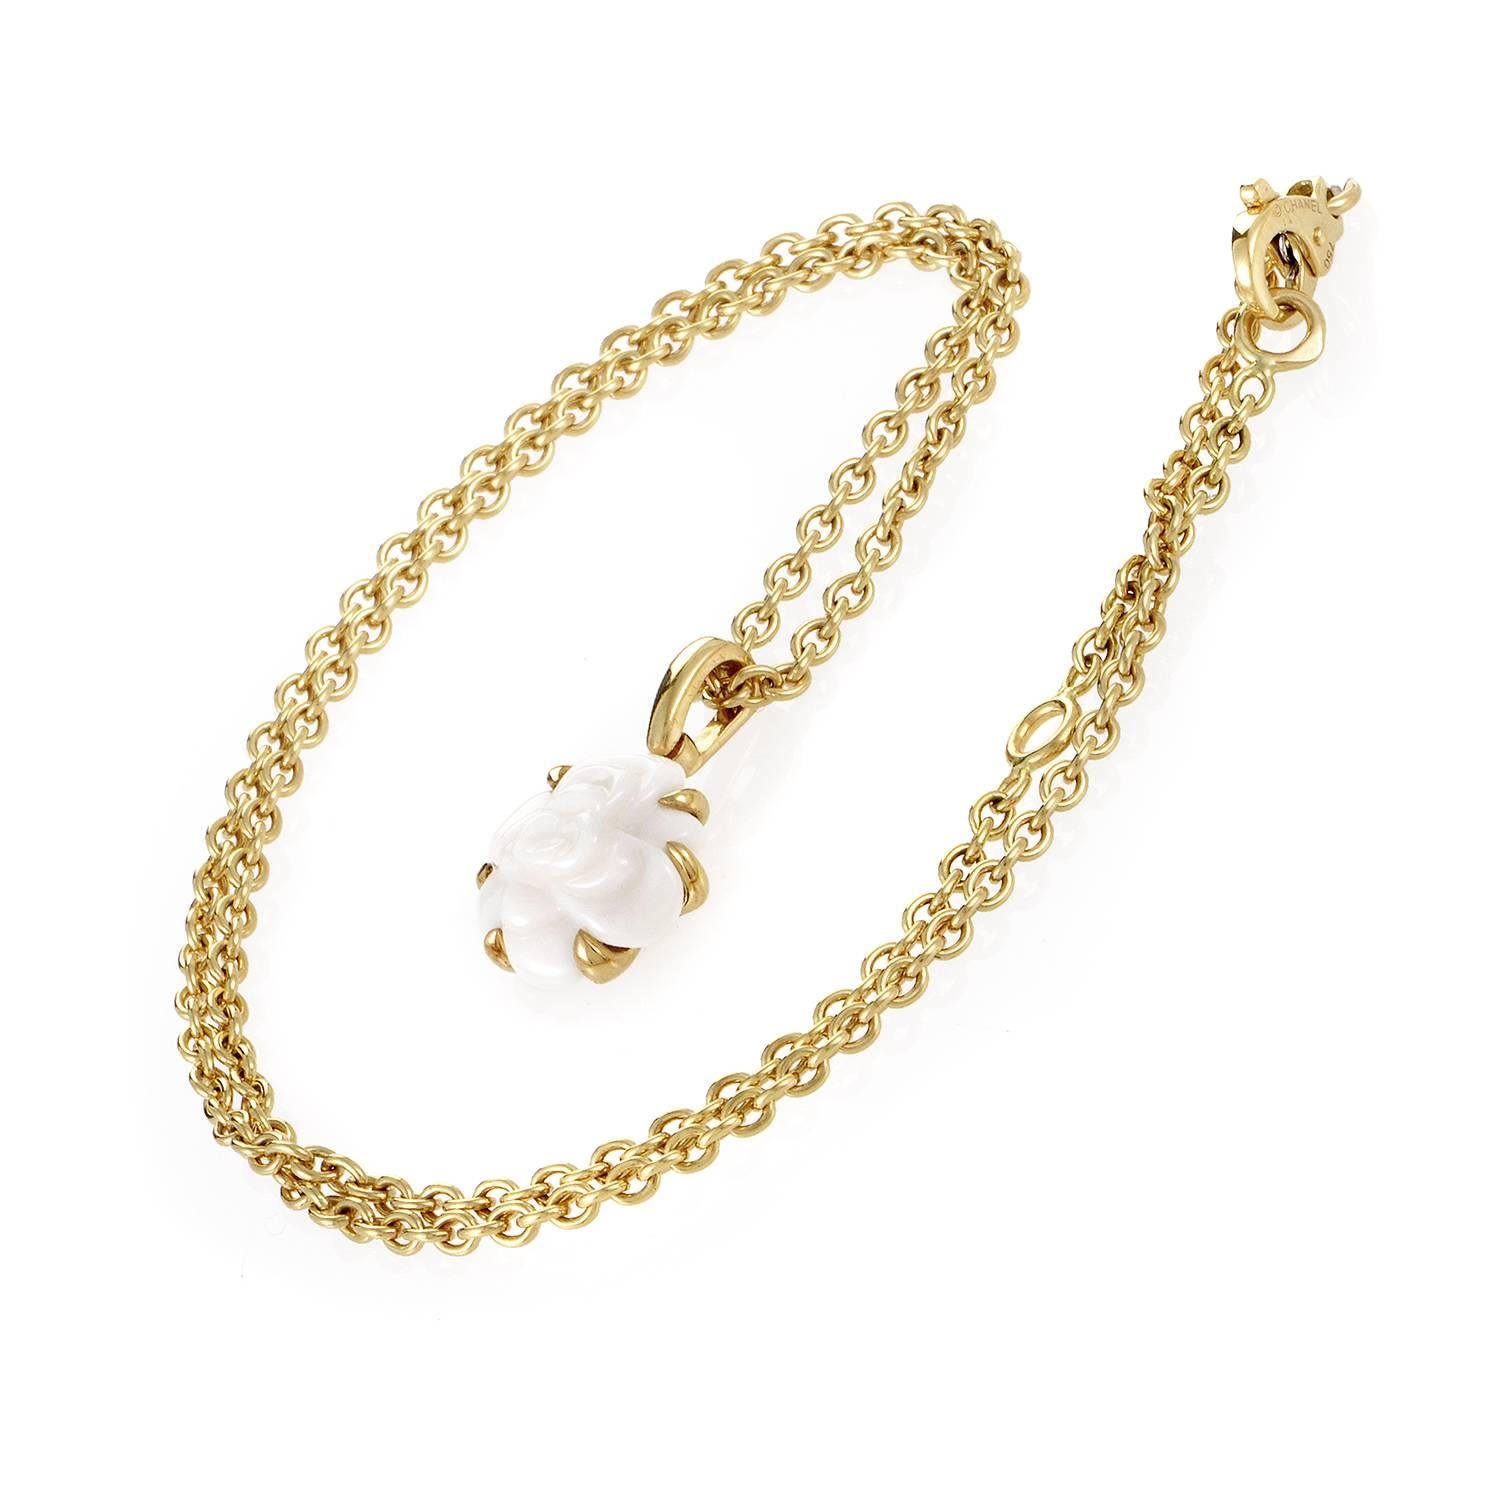 The familiar favored motif of the camélia flower is the focal point to this Chanel pendant. 18K yellow gold drops in fine links, narrowing in on a seamlessly shaped stone of white agate. The prefect plains of each petal roll as fluidly as tides